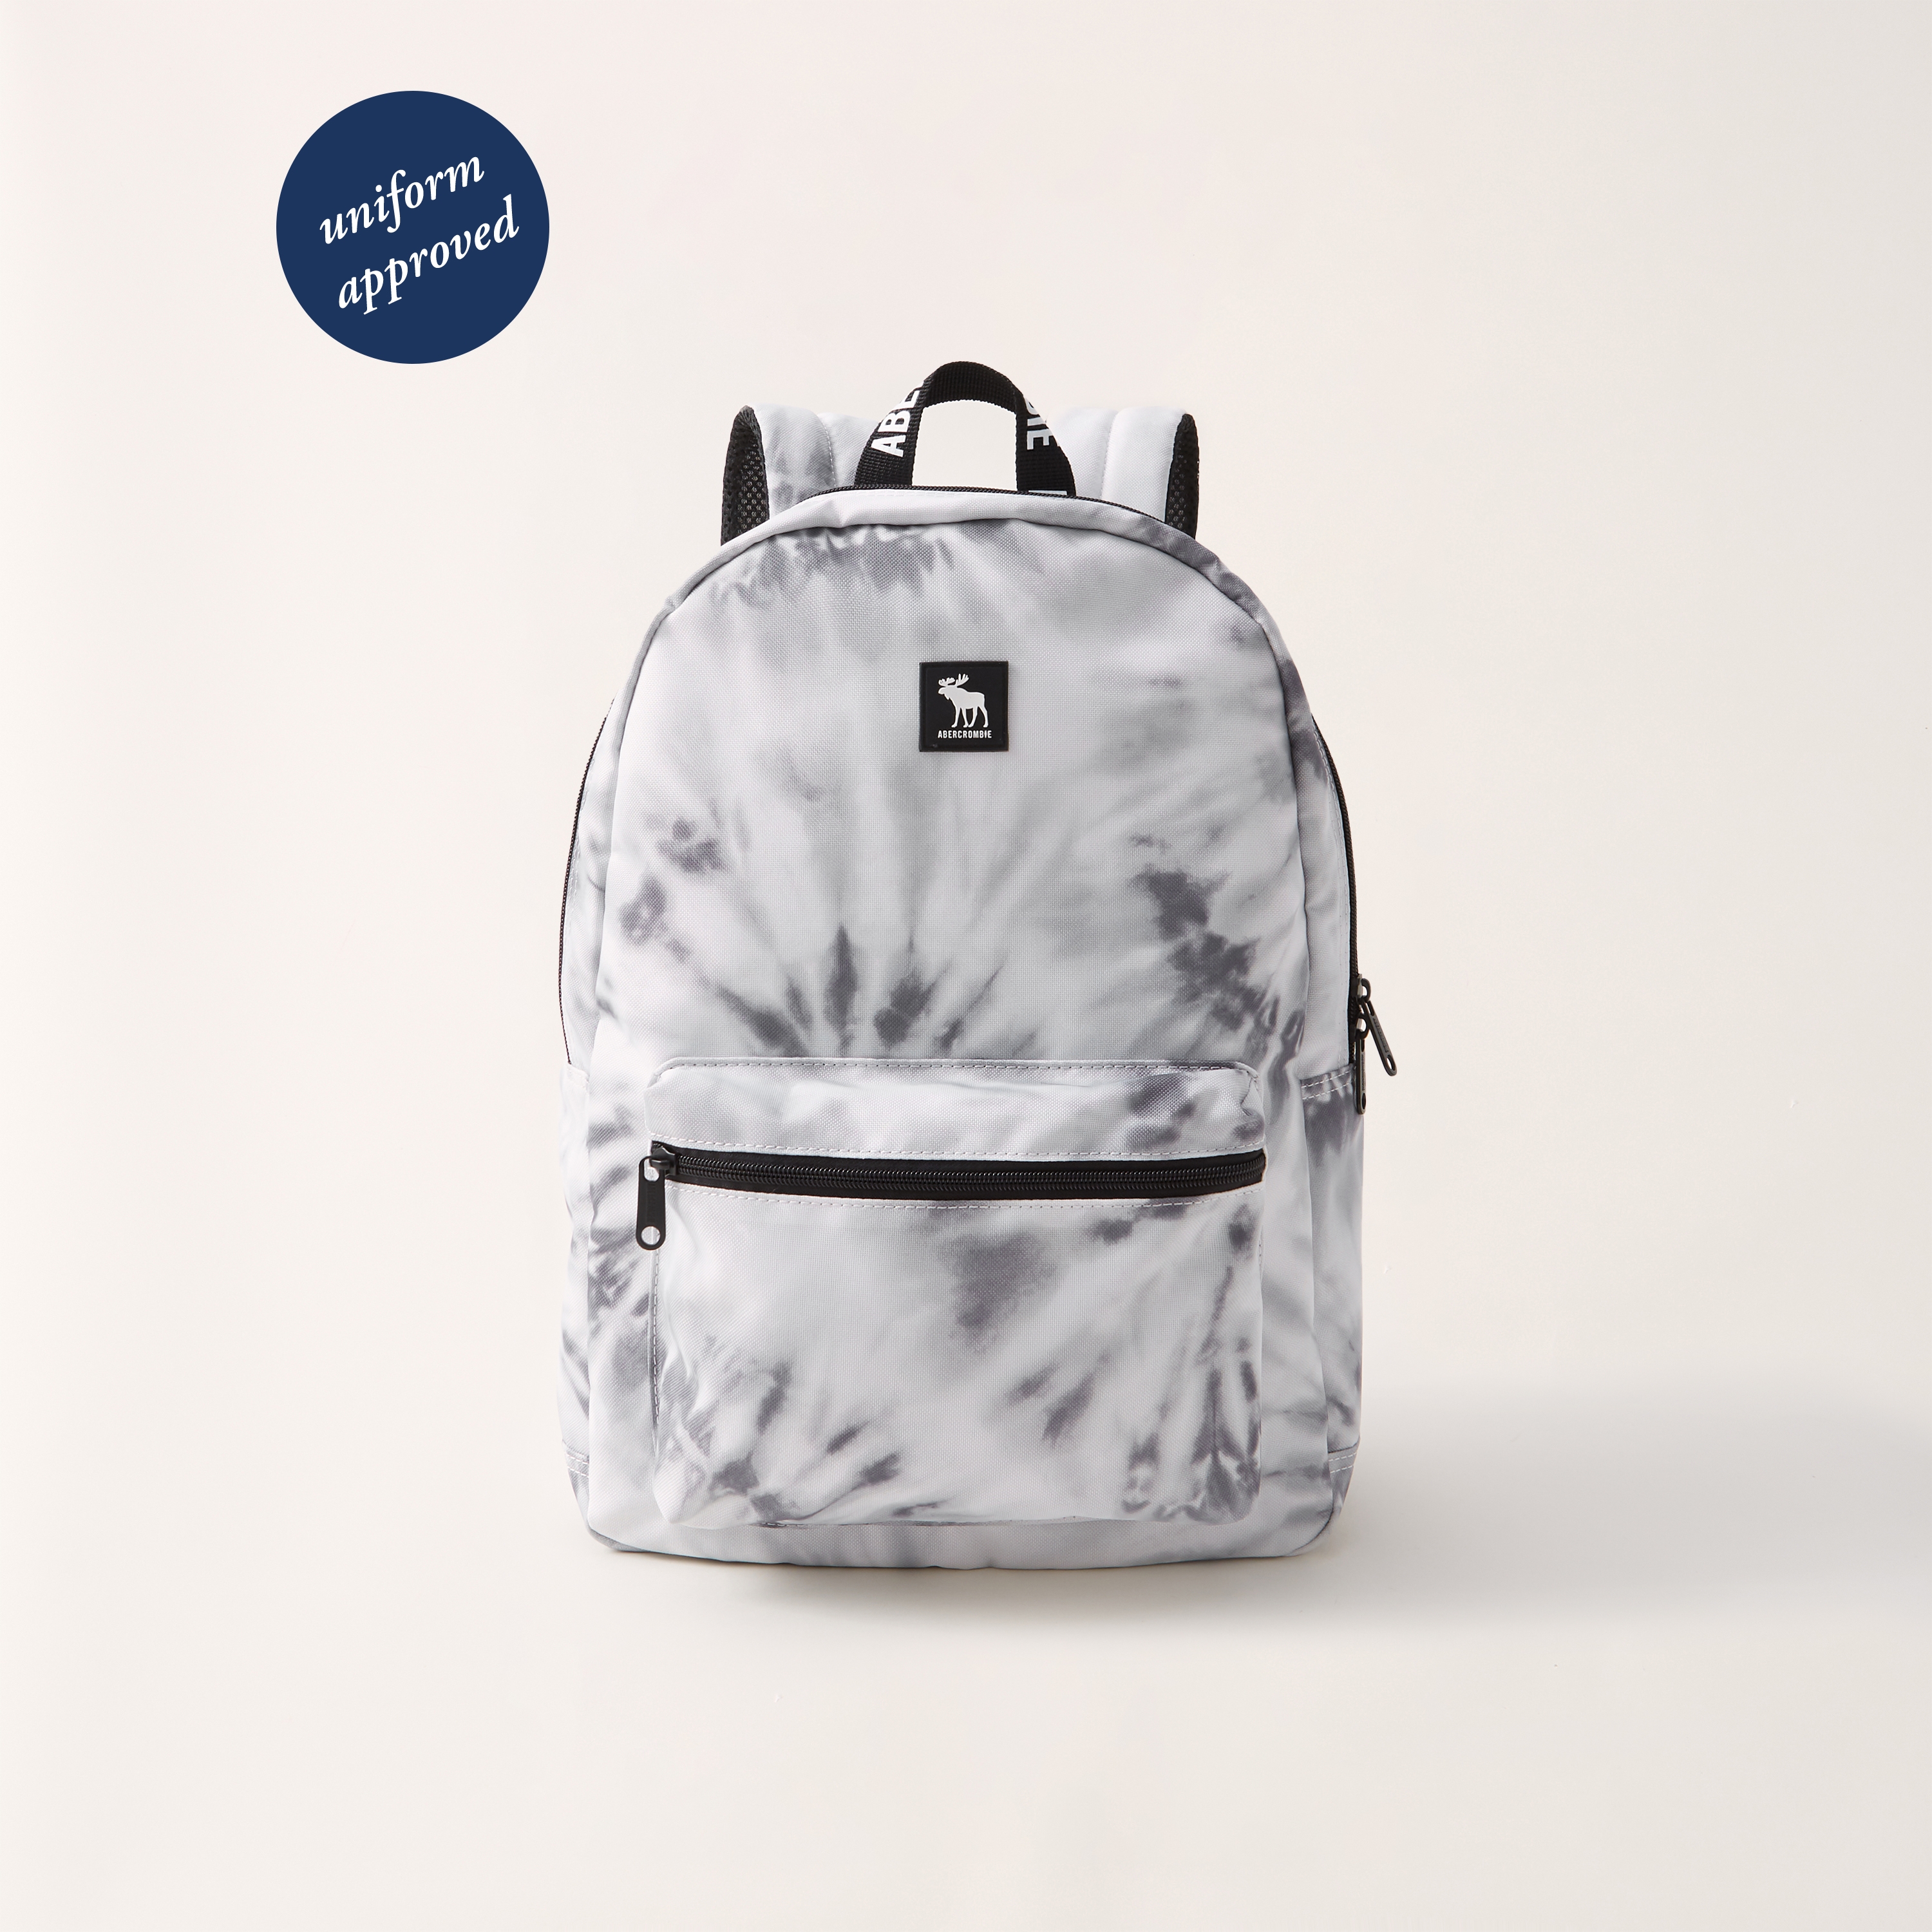 abercrombie backpack